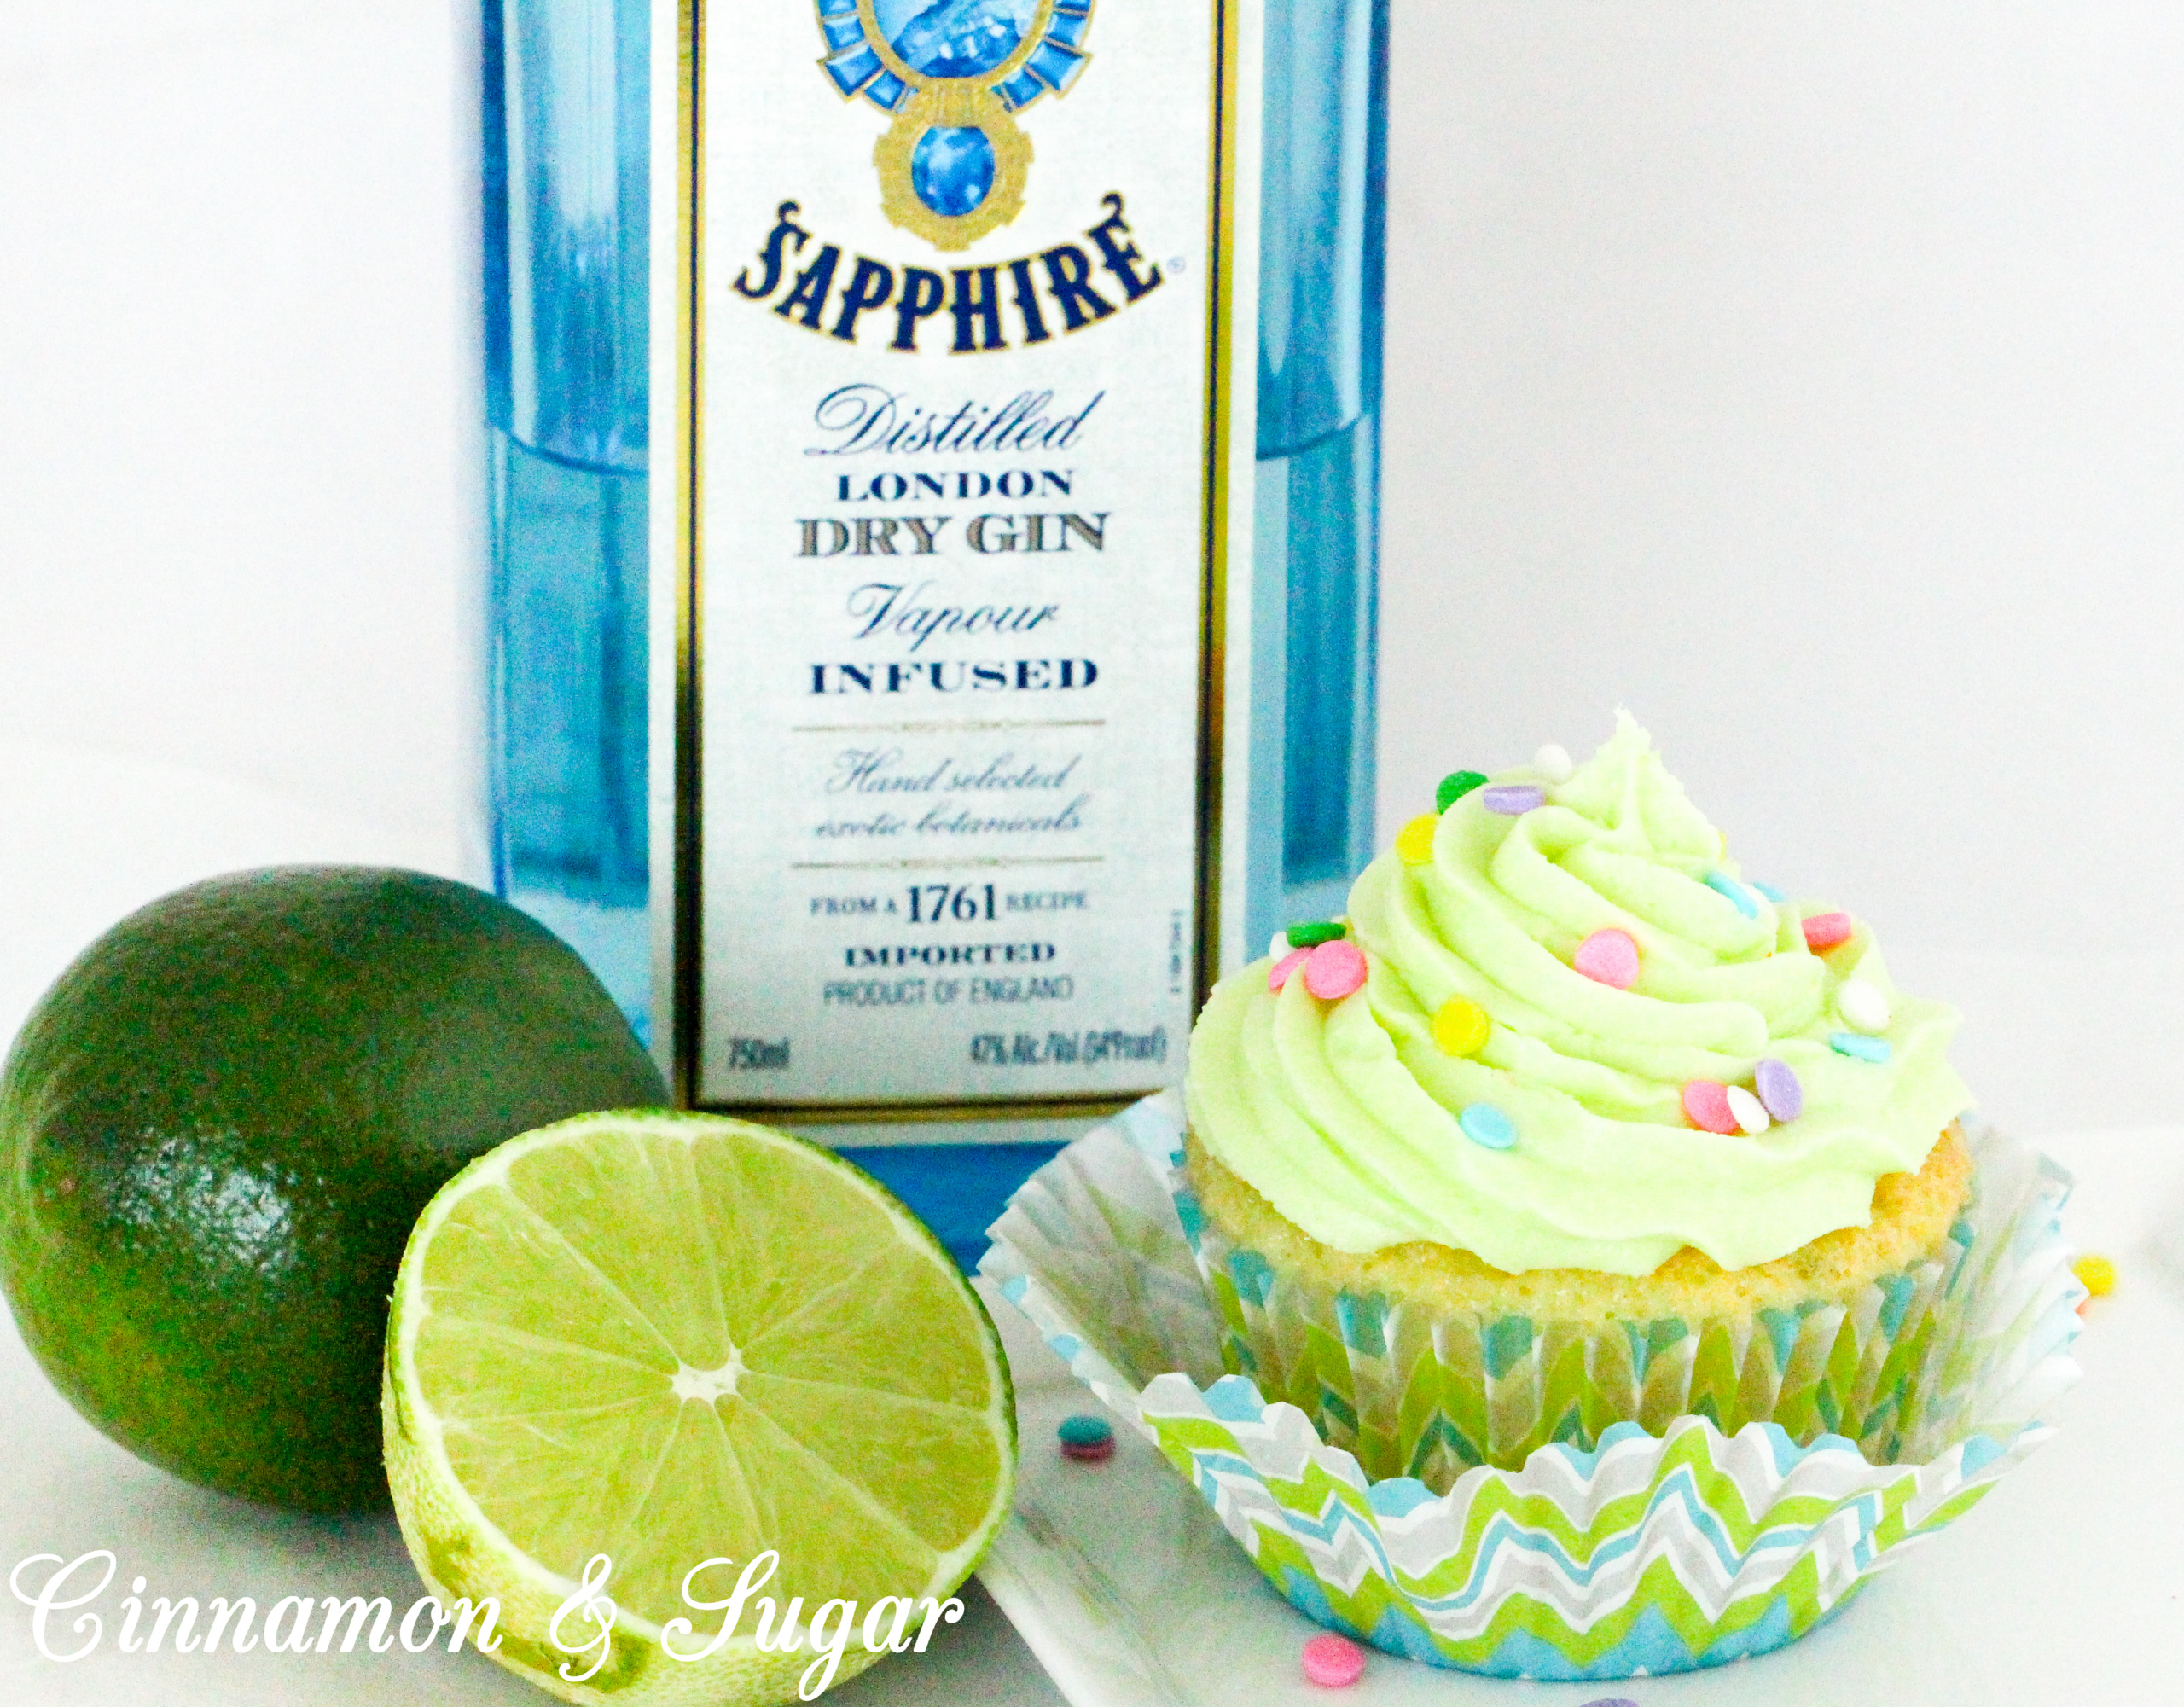 Based on the popular Gimlet Cocktail, these Gimlet Cupcakes replicate the flavor by using layers of premium gin and zesty fresh limes. Recipe shared from cozy mystery SPRINKLES OF SUSPICION by Kim Davis.